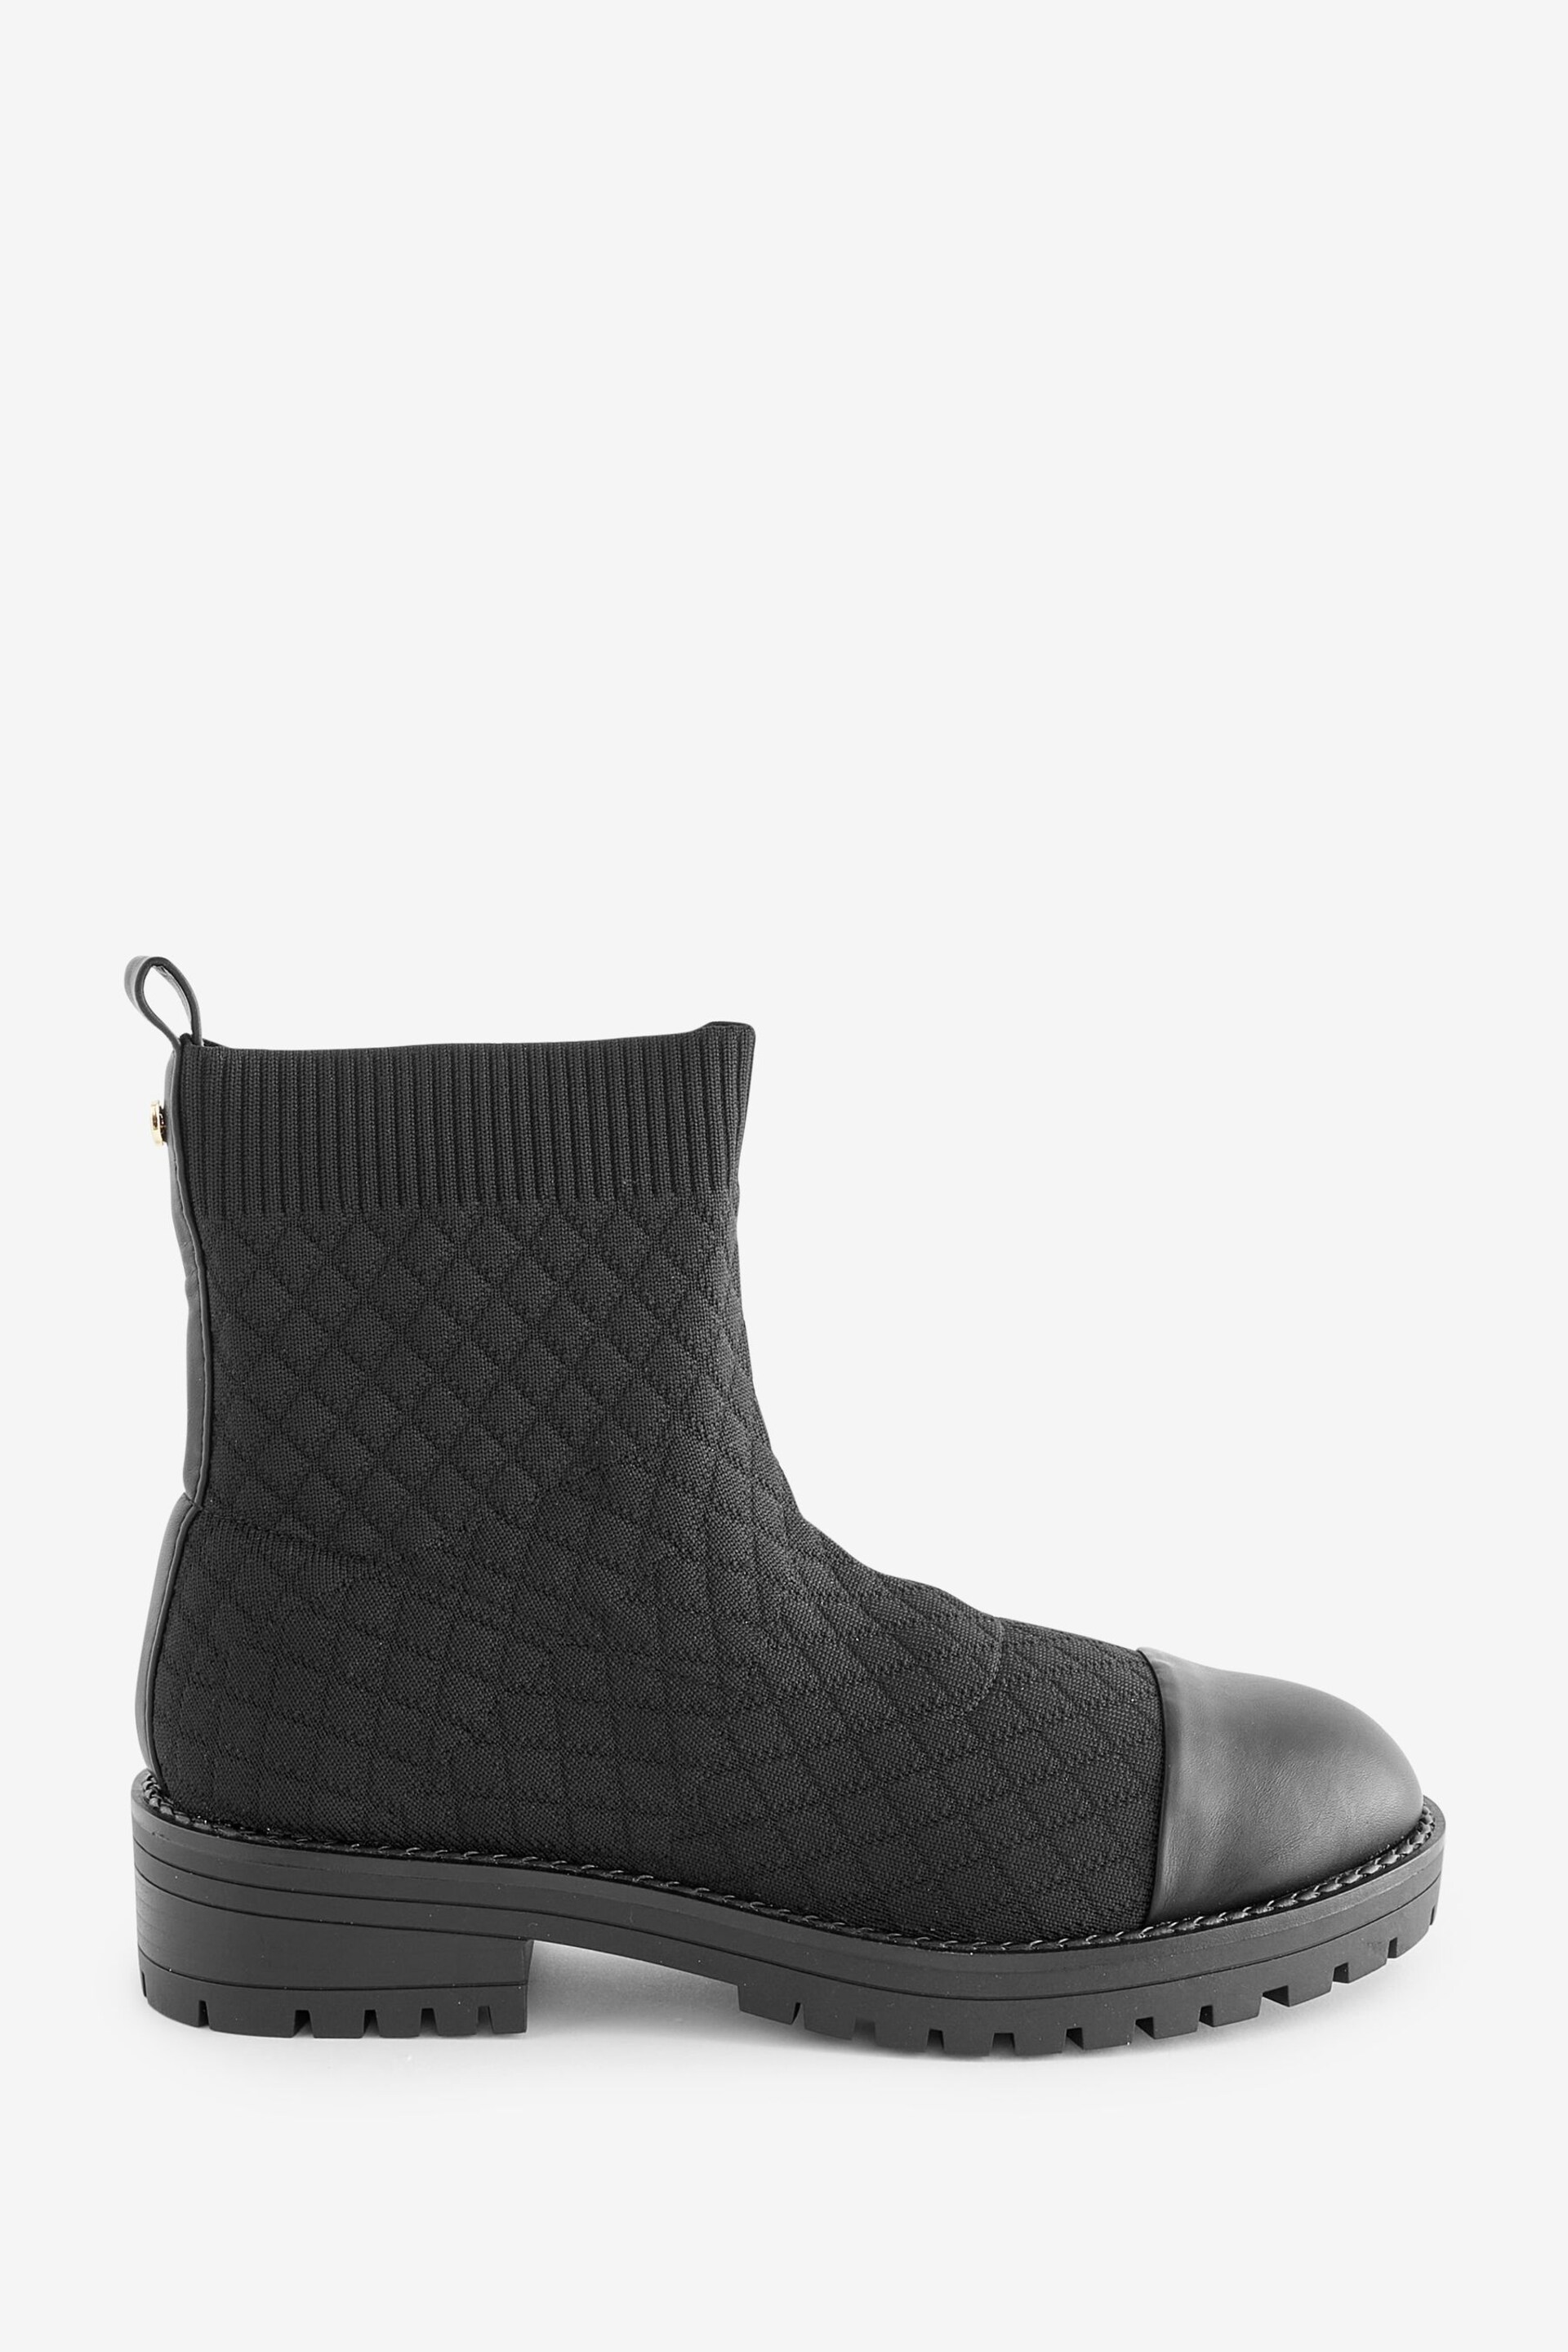 River Island Black Wide Fit Quilted Sock Boots - Image 1 of 1